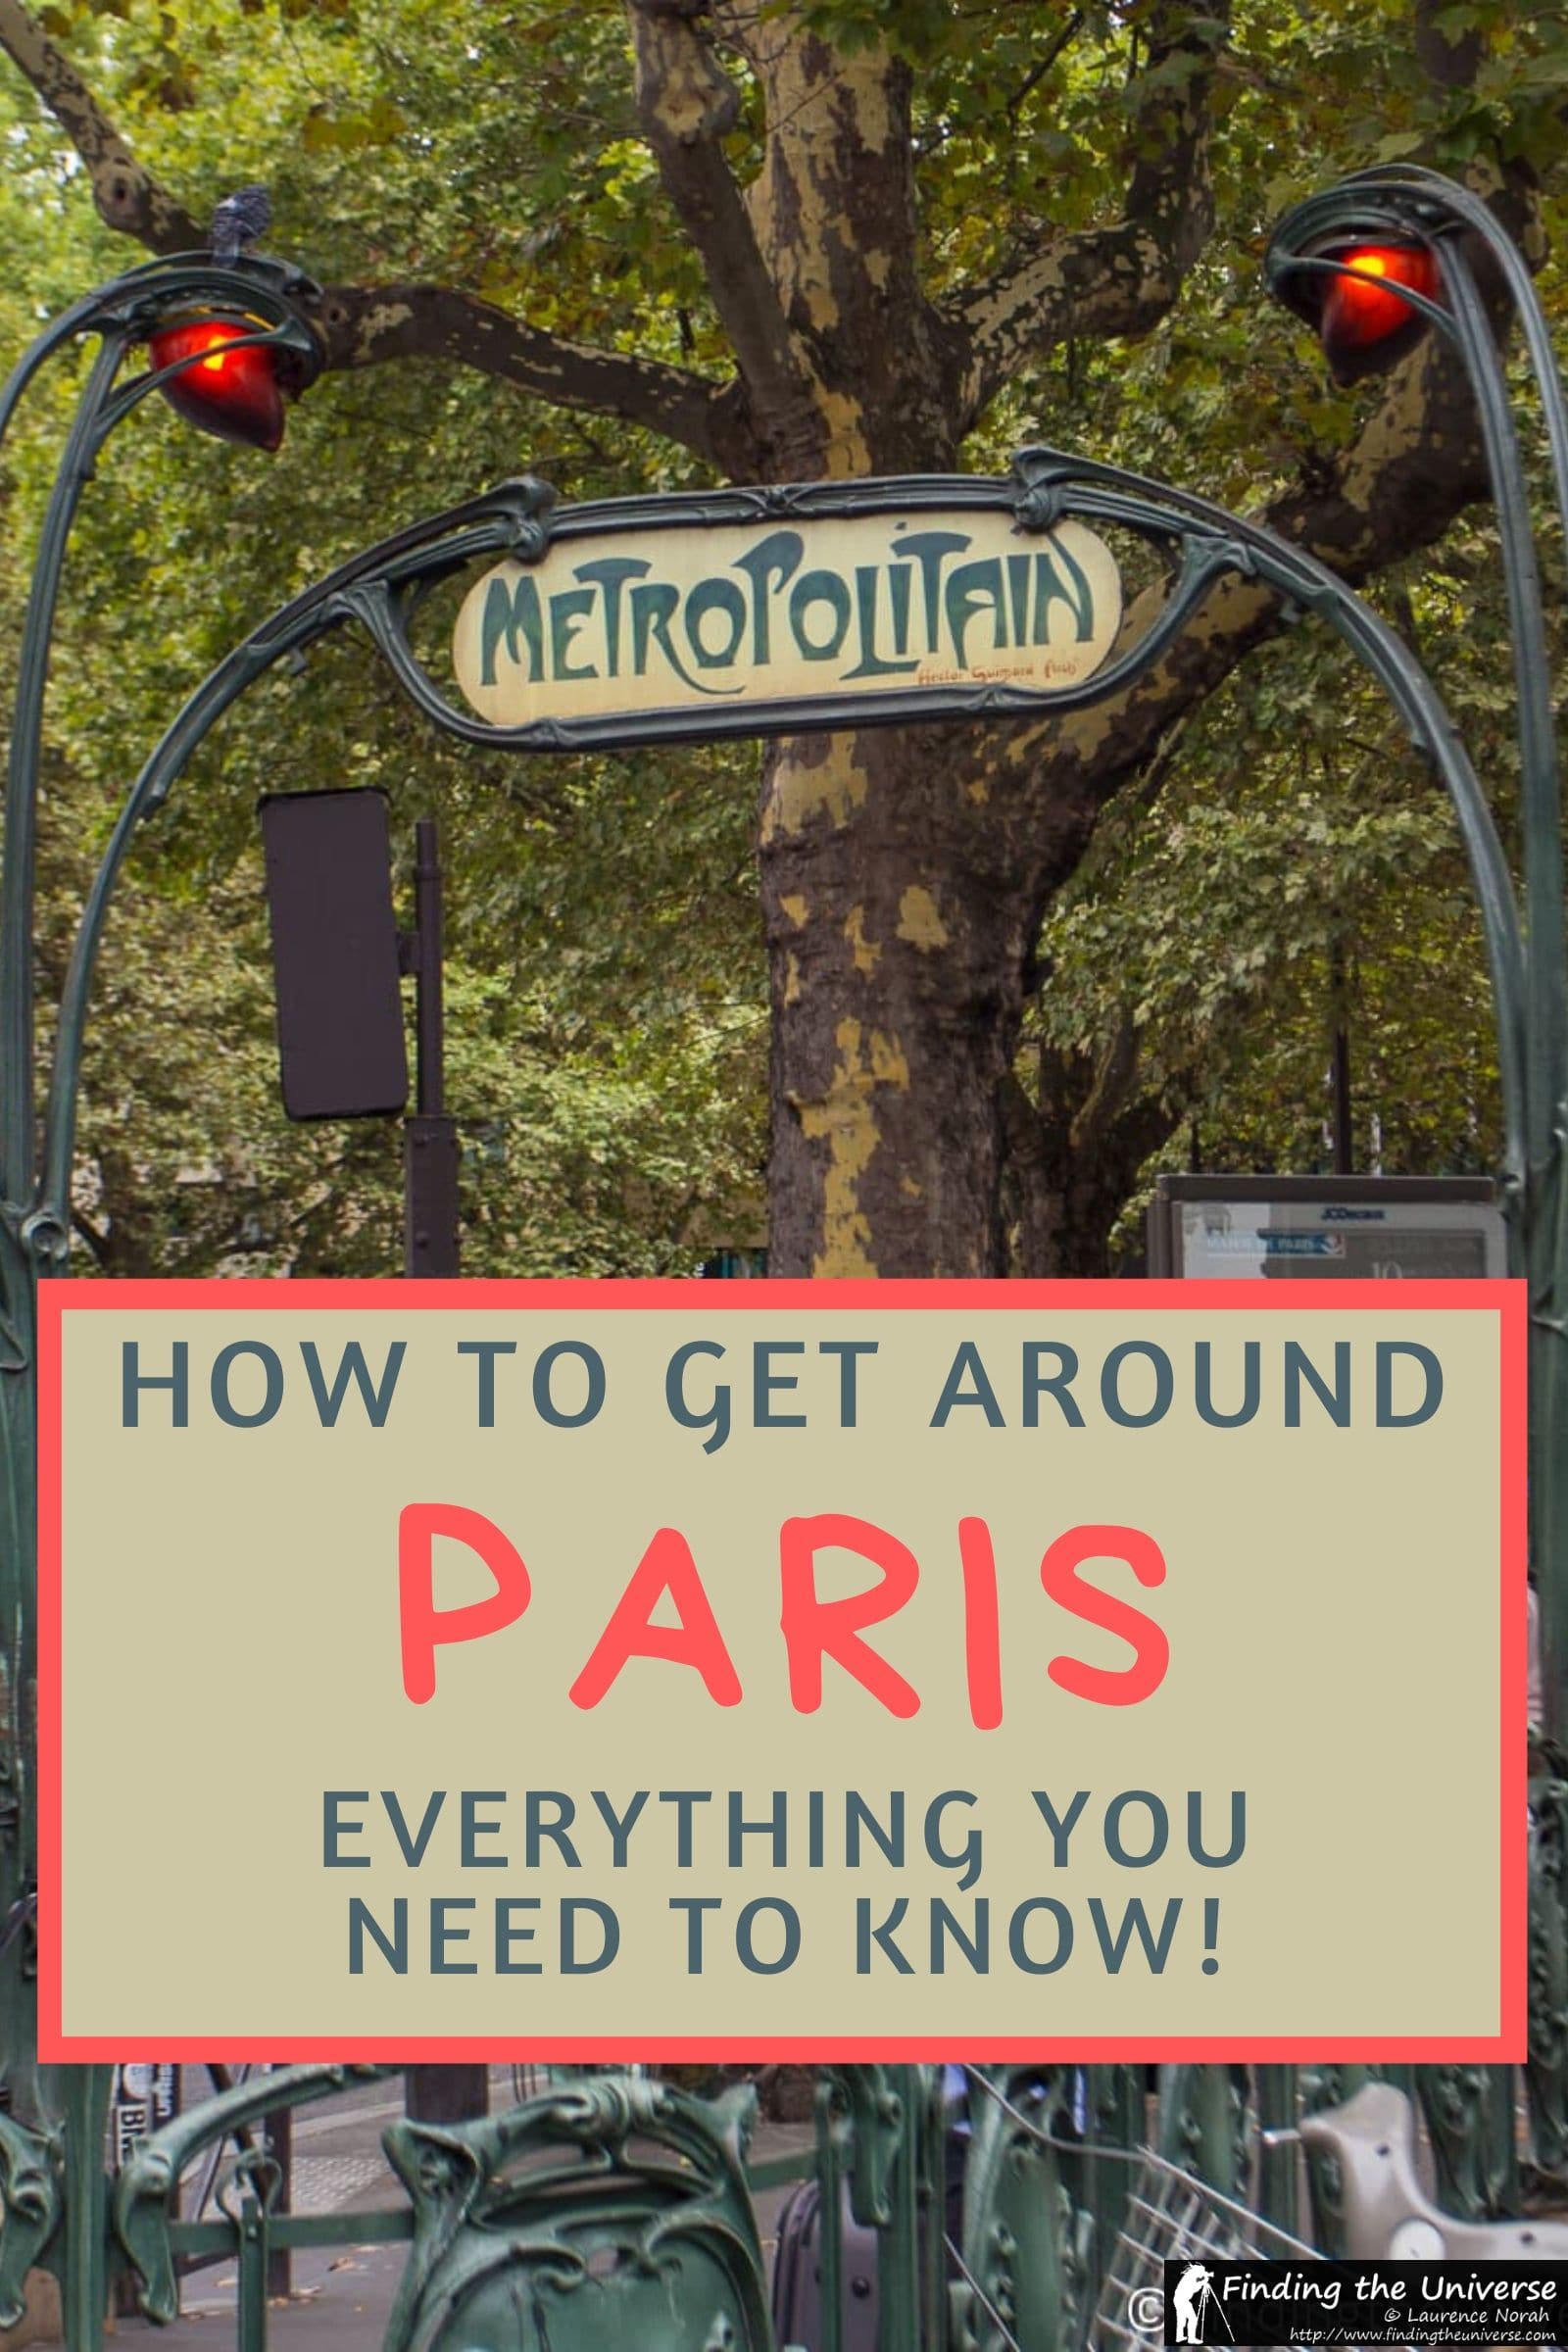 A detailed guide to how to get around Paris, including all the public and private transport options in Paris. Covers metro, rail, bikes, car etc...